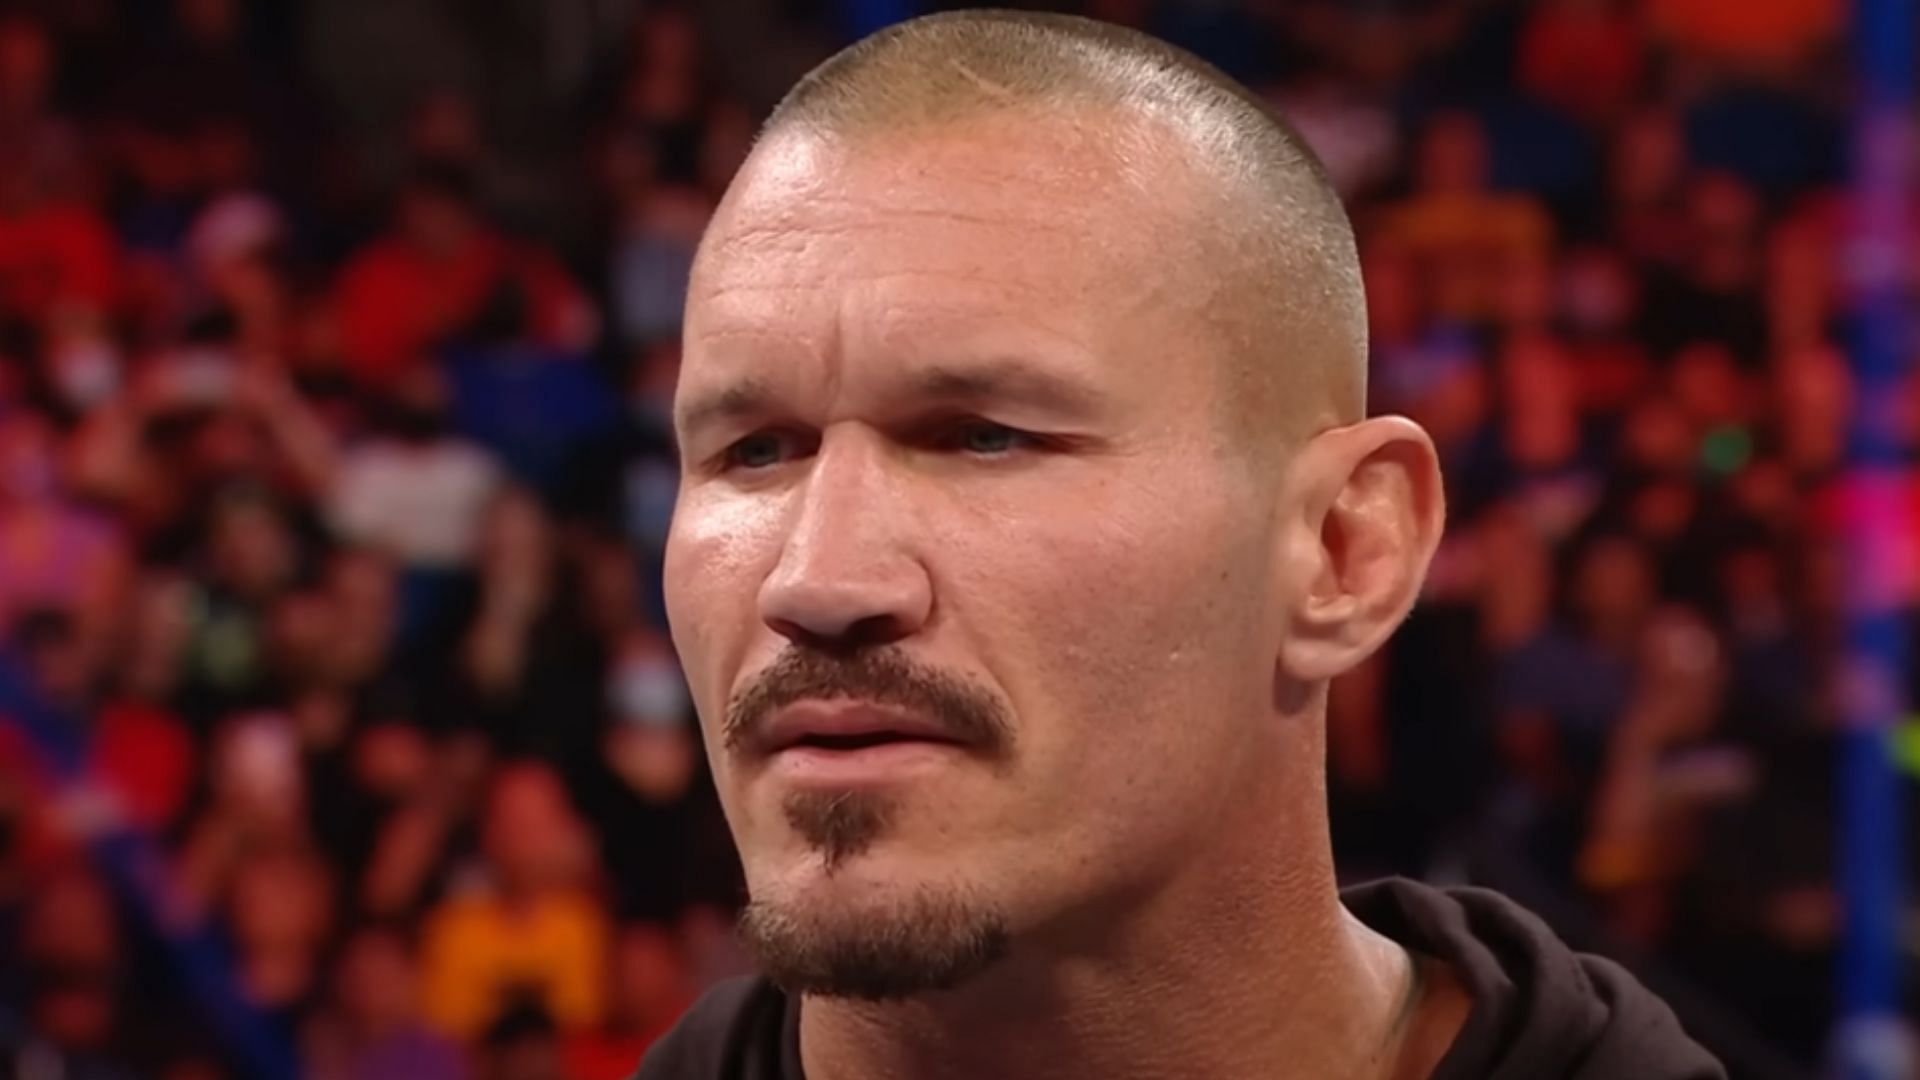 Randy Orton made his wrestling debut in 2000